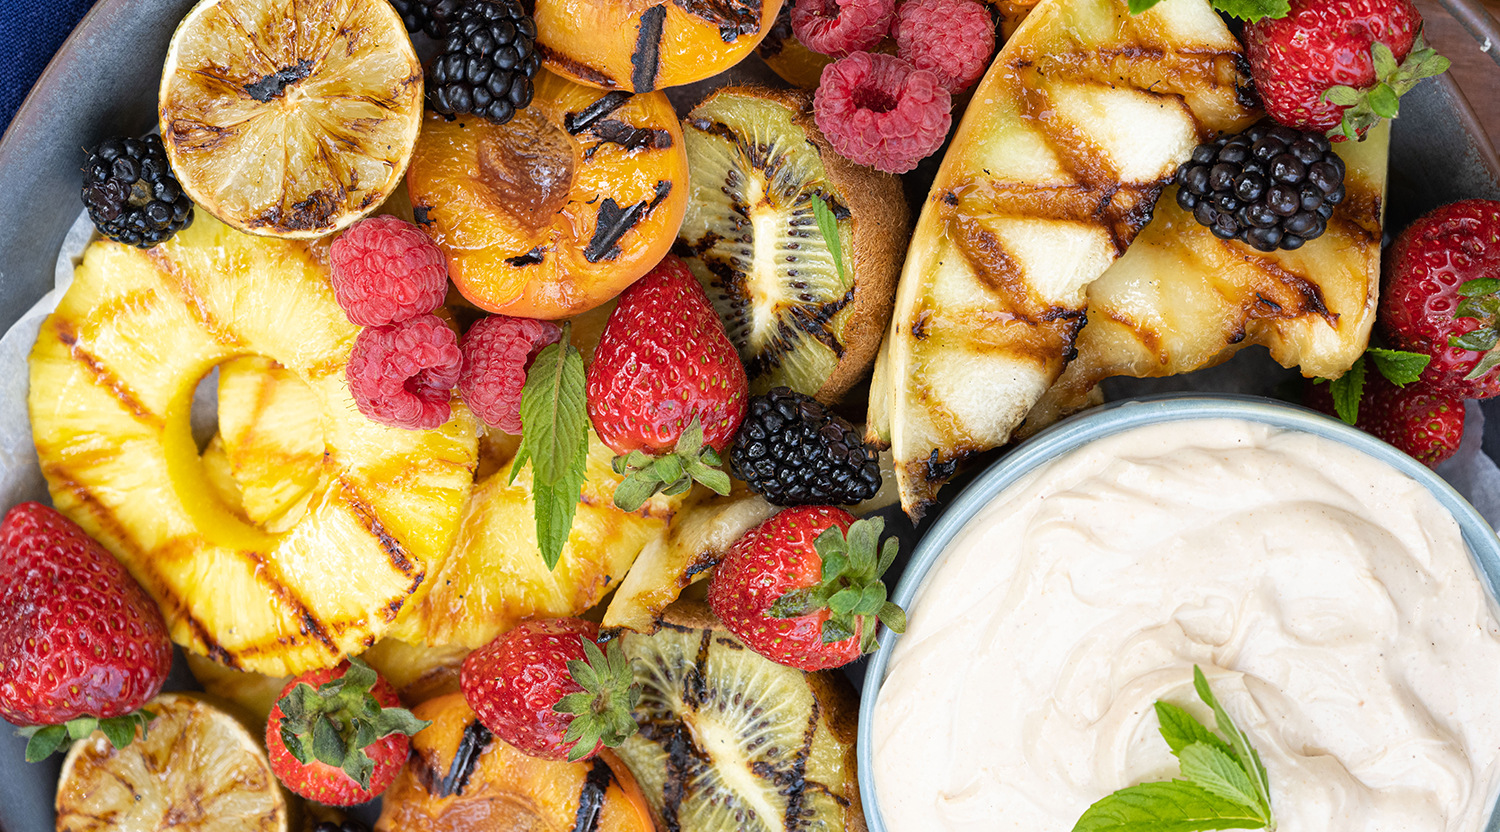 Grilled Fruit Platter with Creamy Tri-Nut Dip